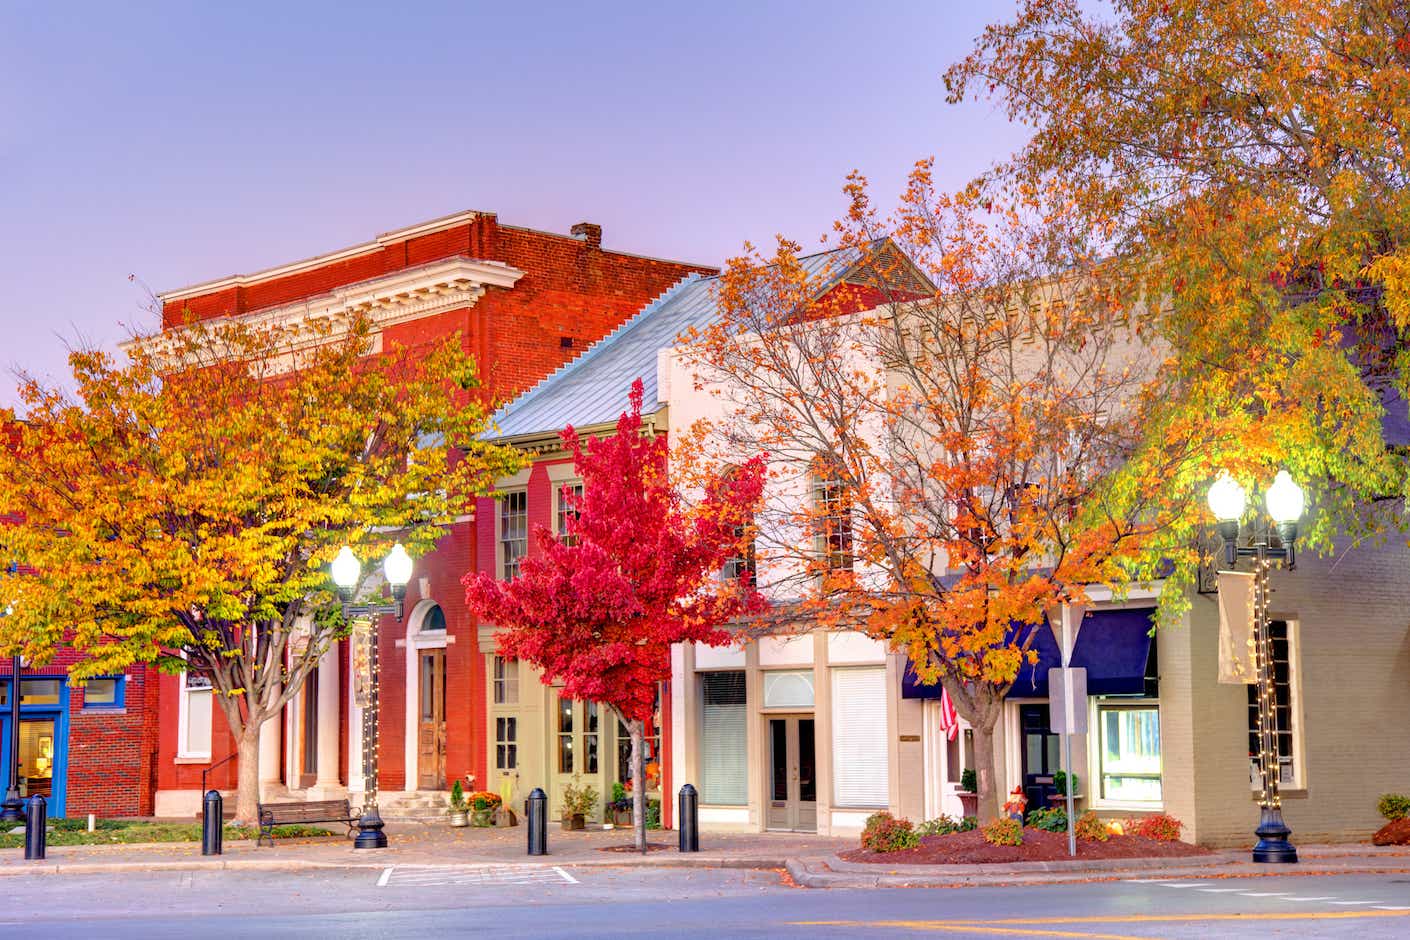 Leafy, red autumn trees pictured in front of quaint, old-fashioned downtown, one-story buildings.